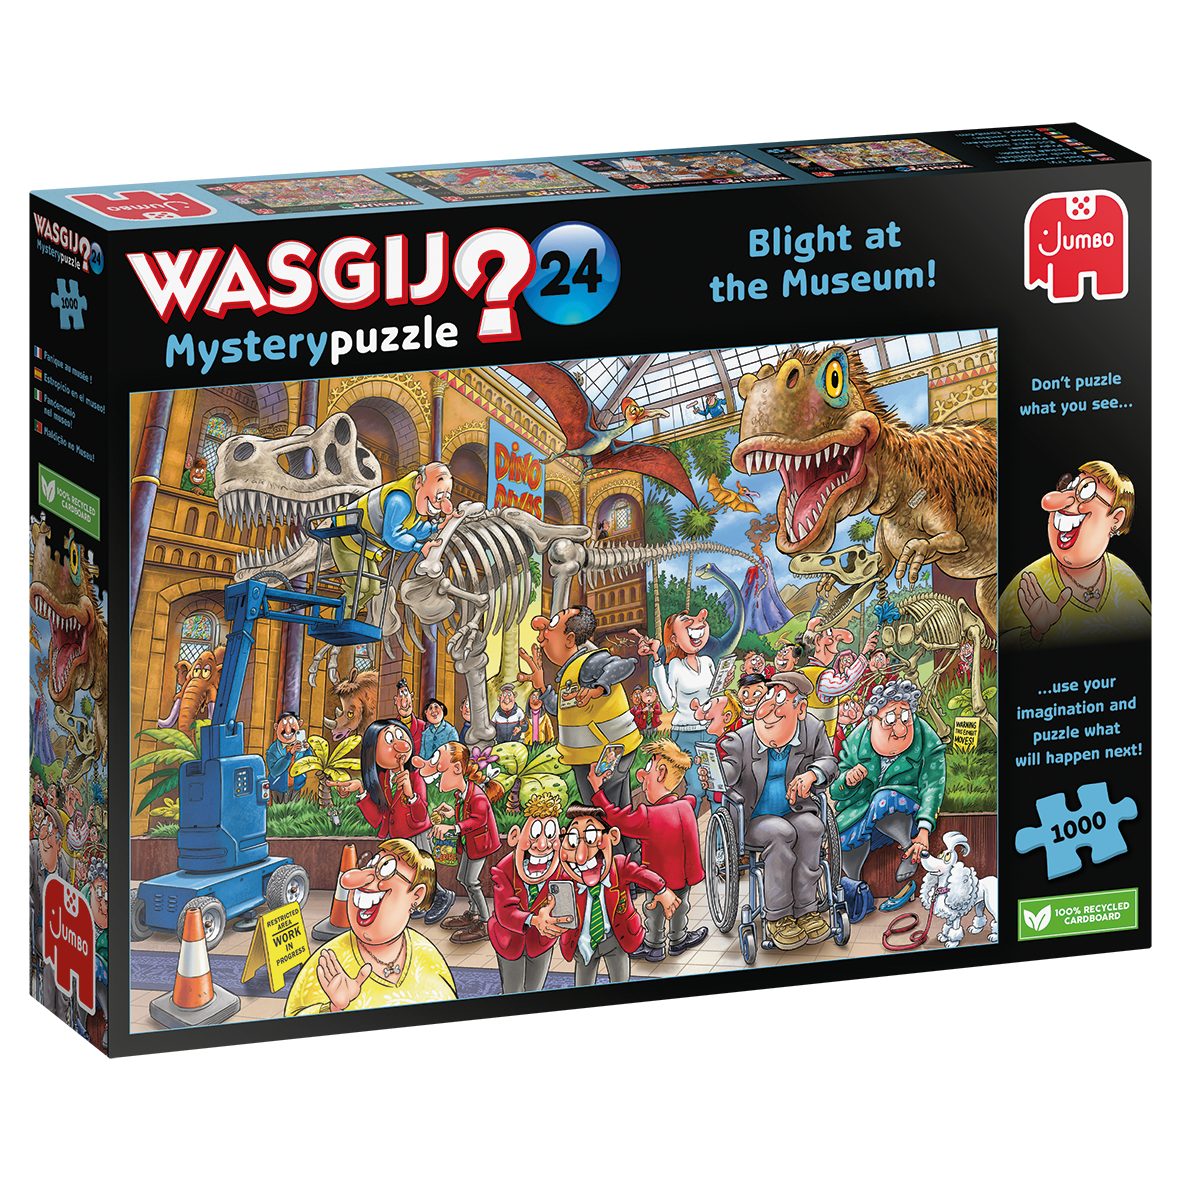 Spiele 24 Wasgij Jumbo Puzzleteile Puzzle Museum!, Blight 1000 at Mystery the